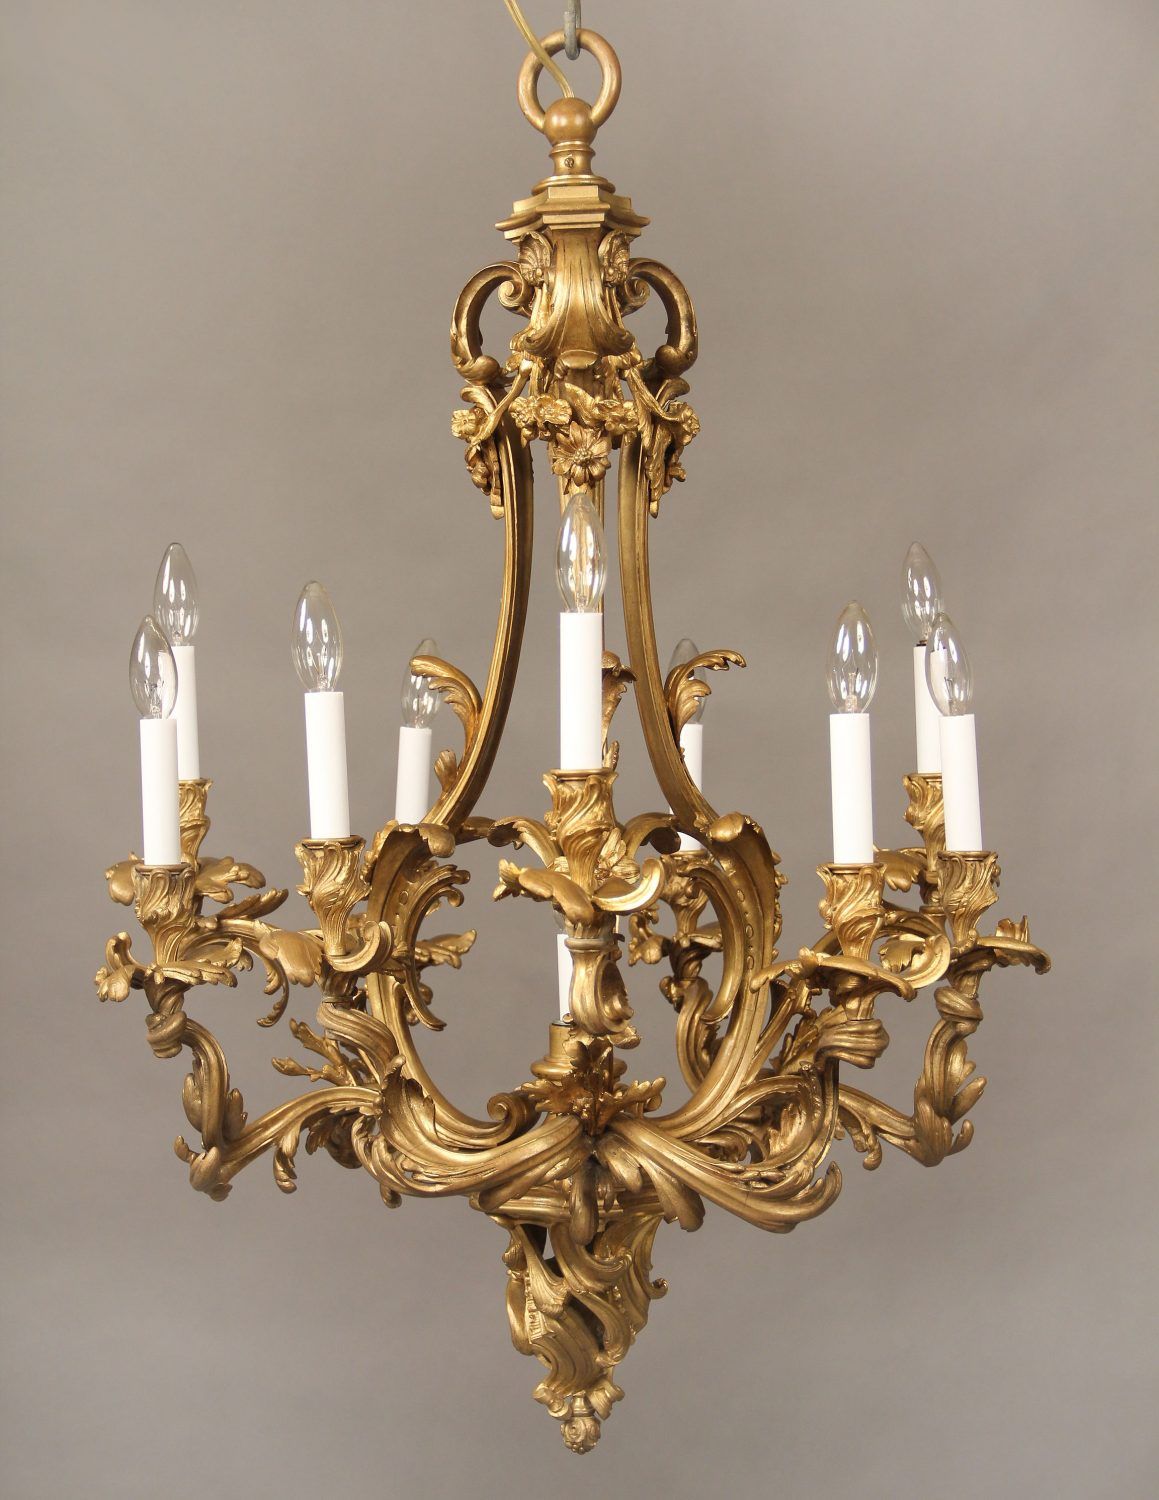 Antique Brass Chandelier : antique brass chandelier how to choose the right one